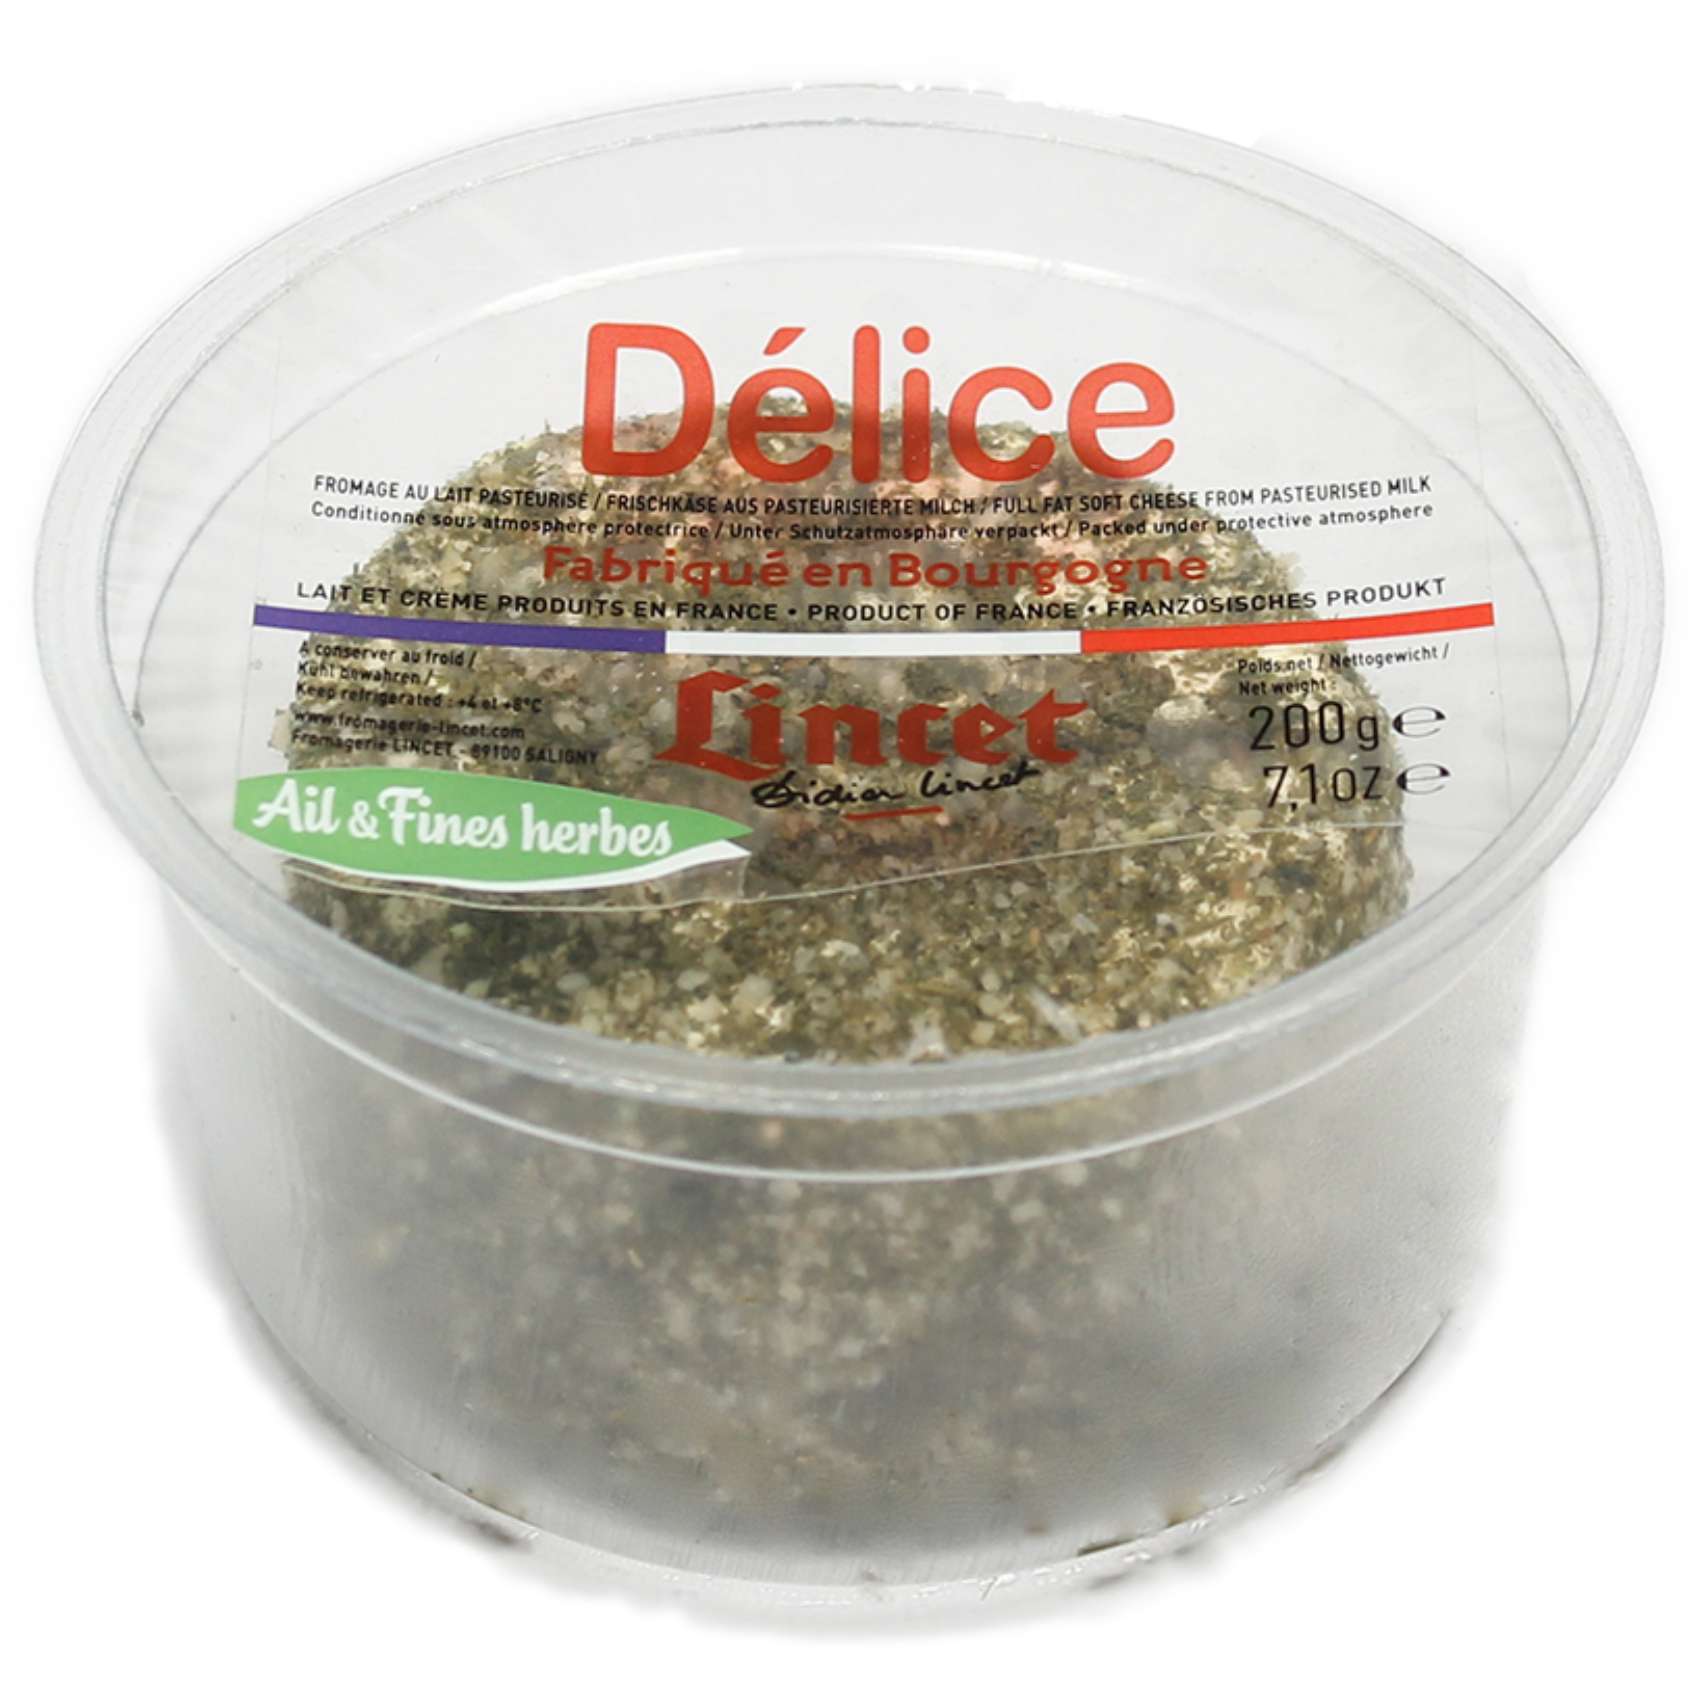 Lincet Delice Garlic And Herbs Fromage Au Lait 200g